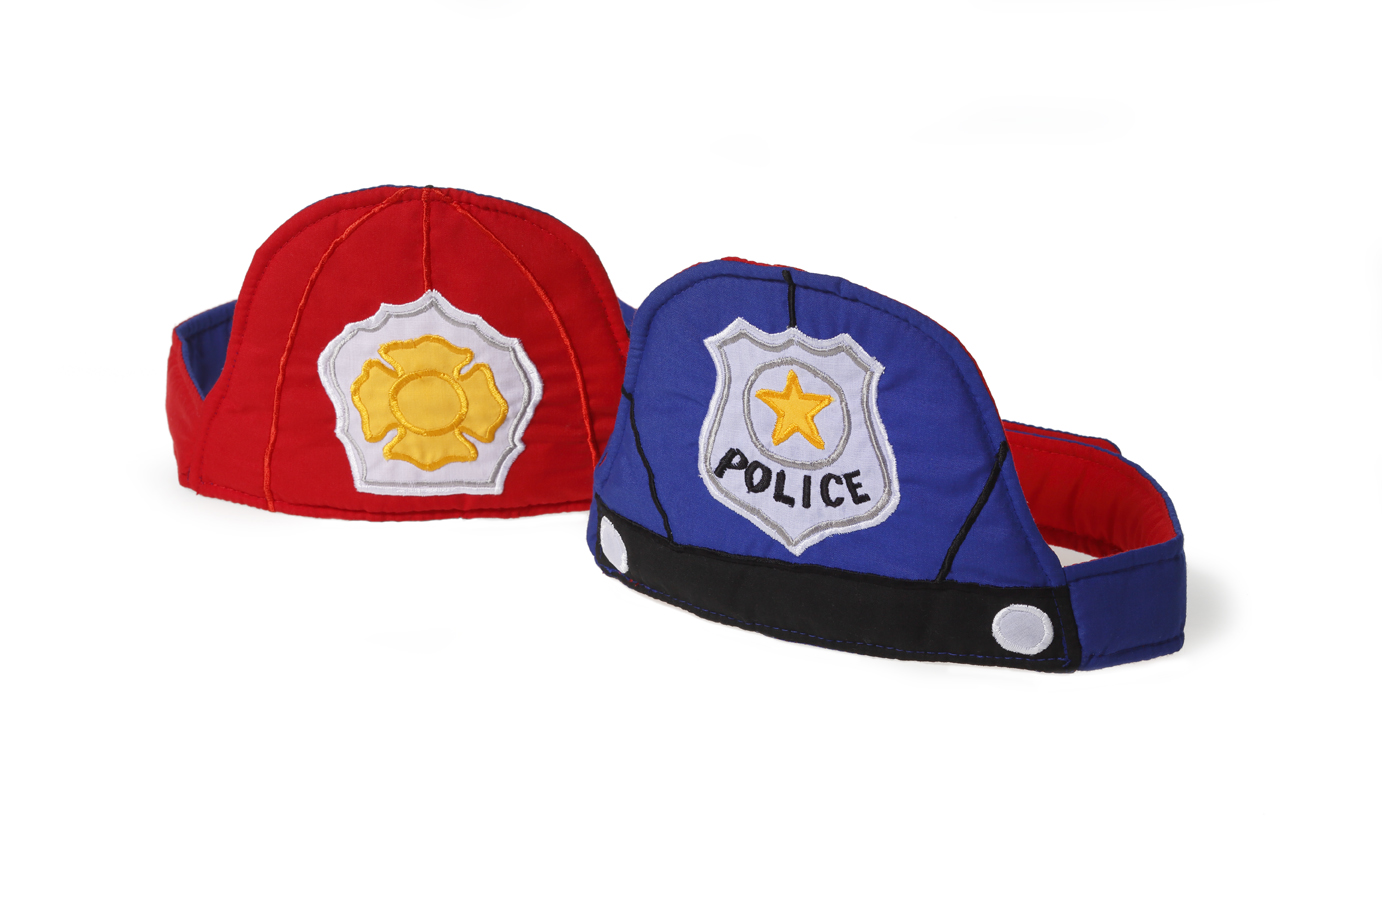 Police and Firefighter 2-in-1